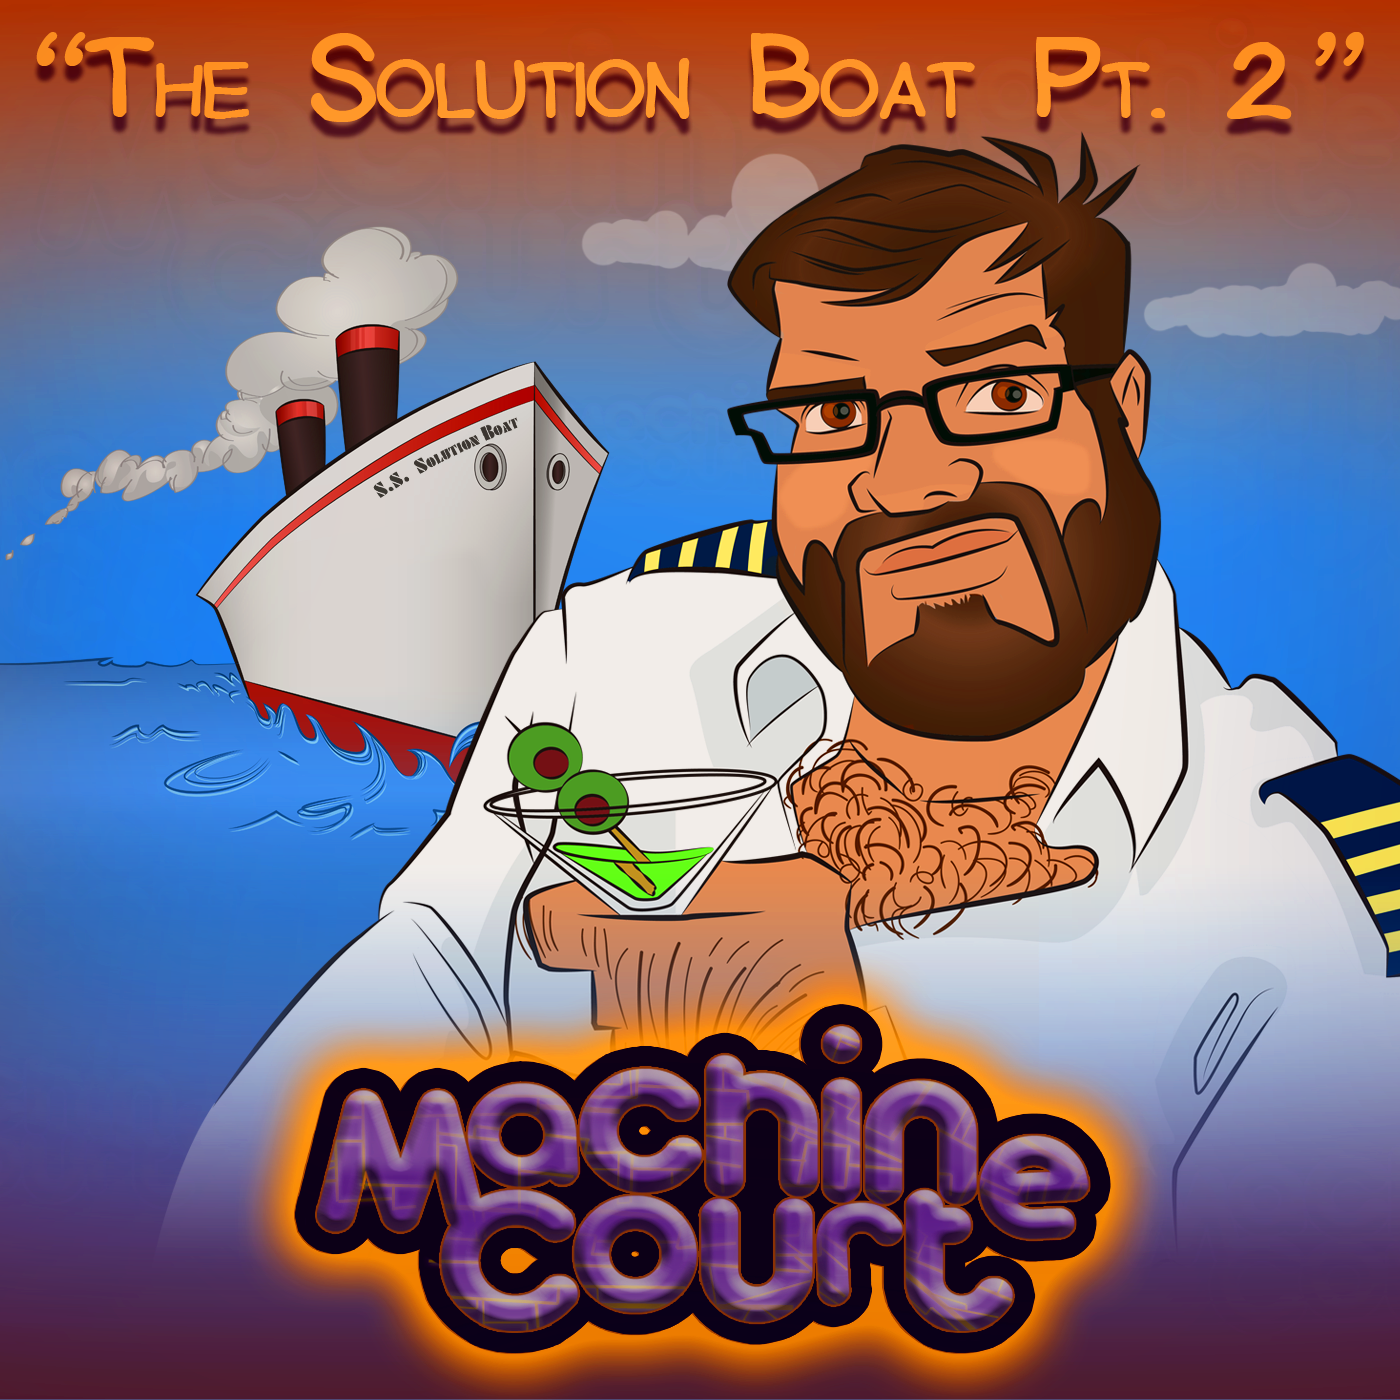 4.08 “The Solution Boat Pt. 2”